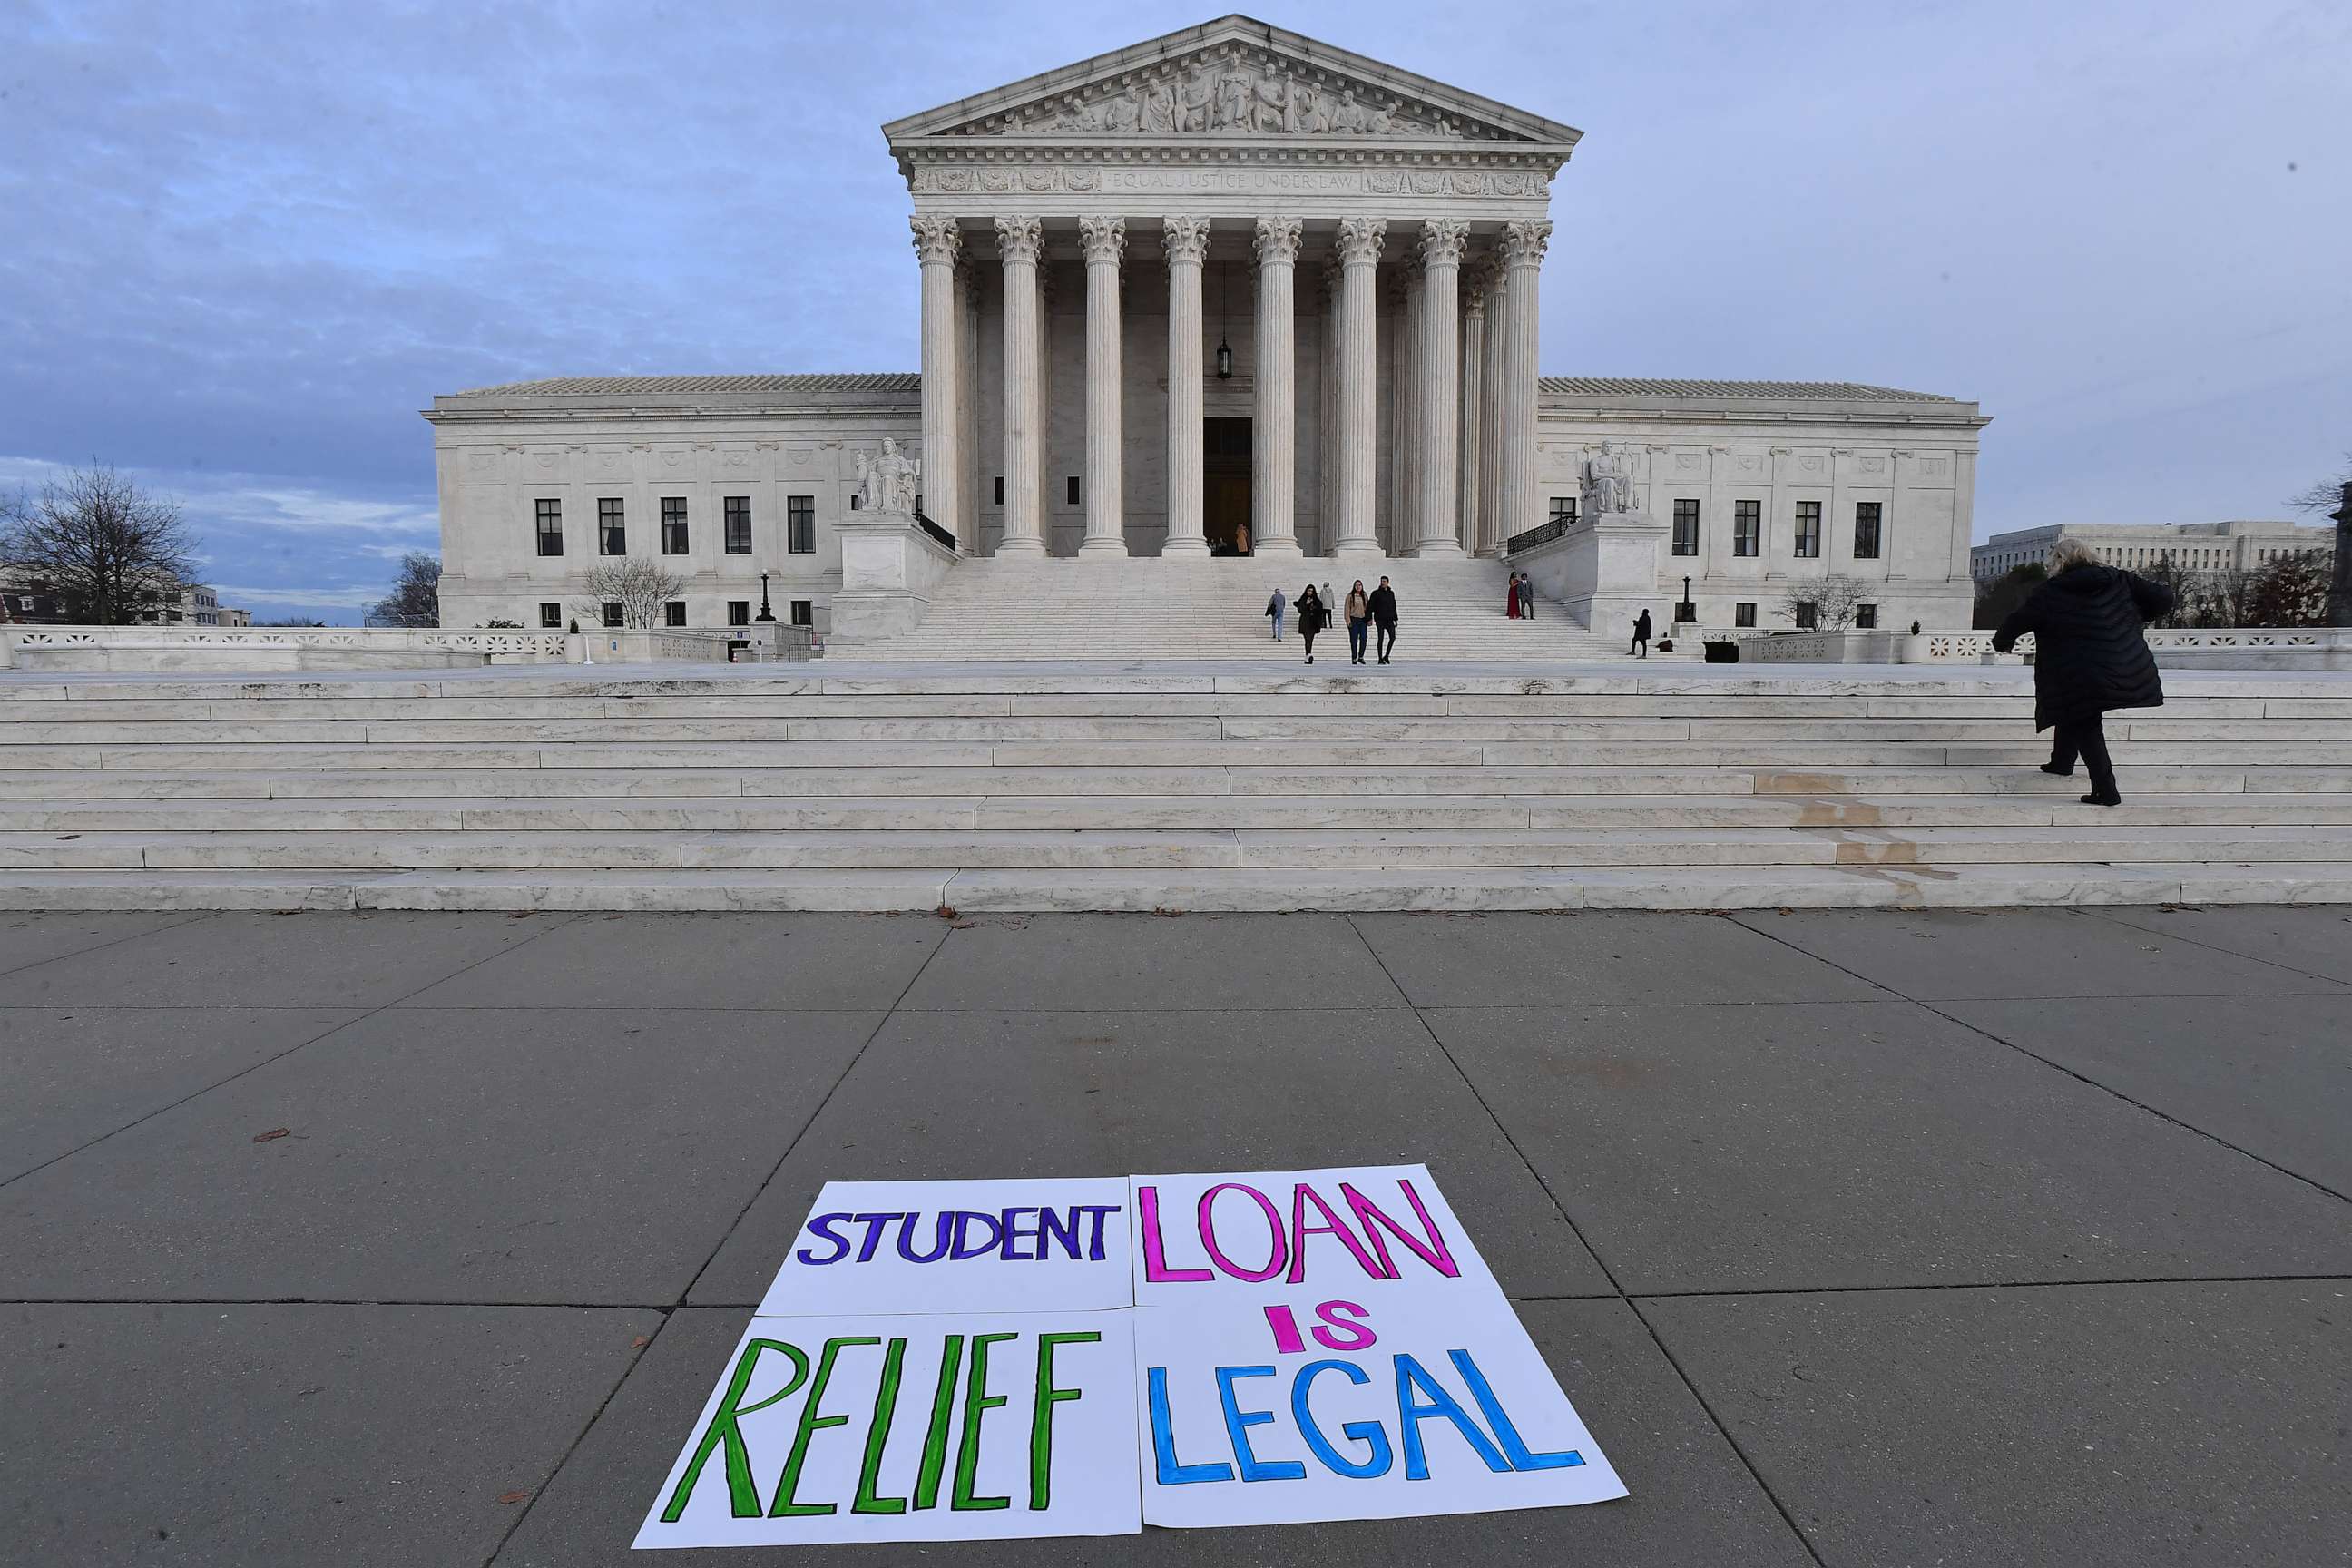 PHOTO: Student loan borrowers gathered at the Supreme Court today to tell the court that student loan relief is legal on Jan. 2, 2023, in Washington, D.C.